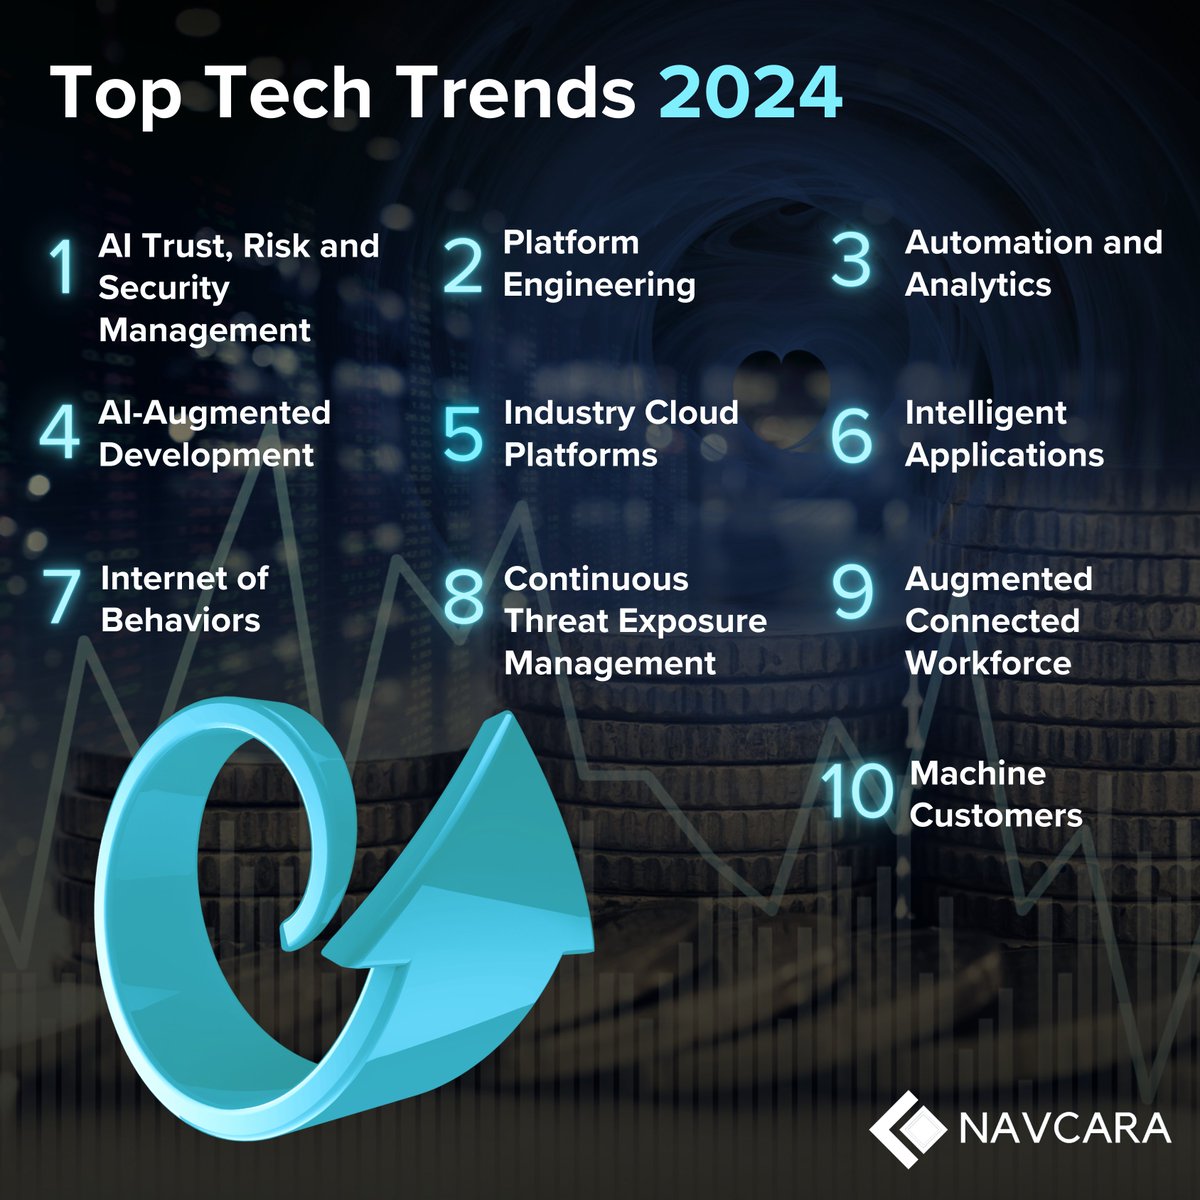 In the coming years, strategic #tech trends will shape critical #business decisions. From safeguarding investments to tailoring #solutions for stakeholders, each #trend aligns with key business themes.
Let’s discover the list of new tech trends with @Celonis @salesforce @Oracle